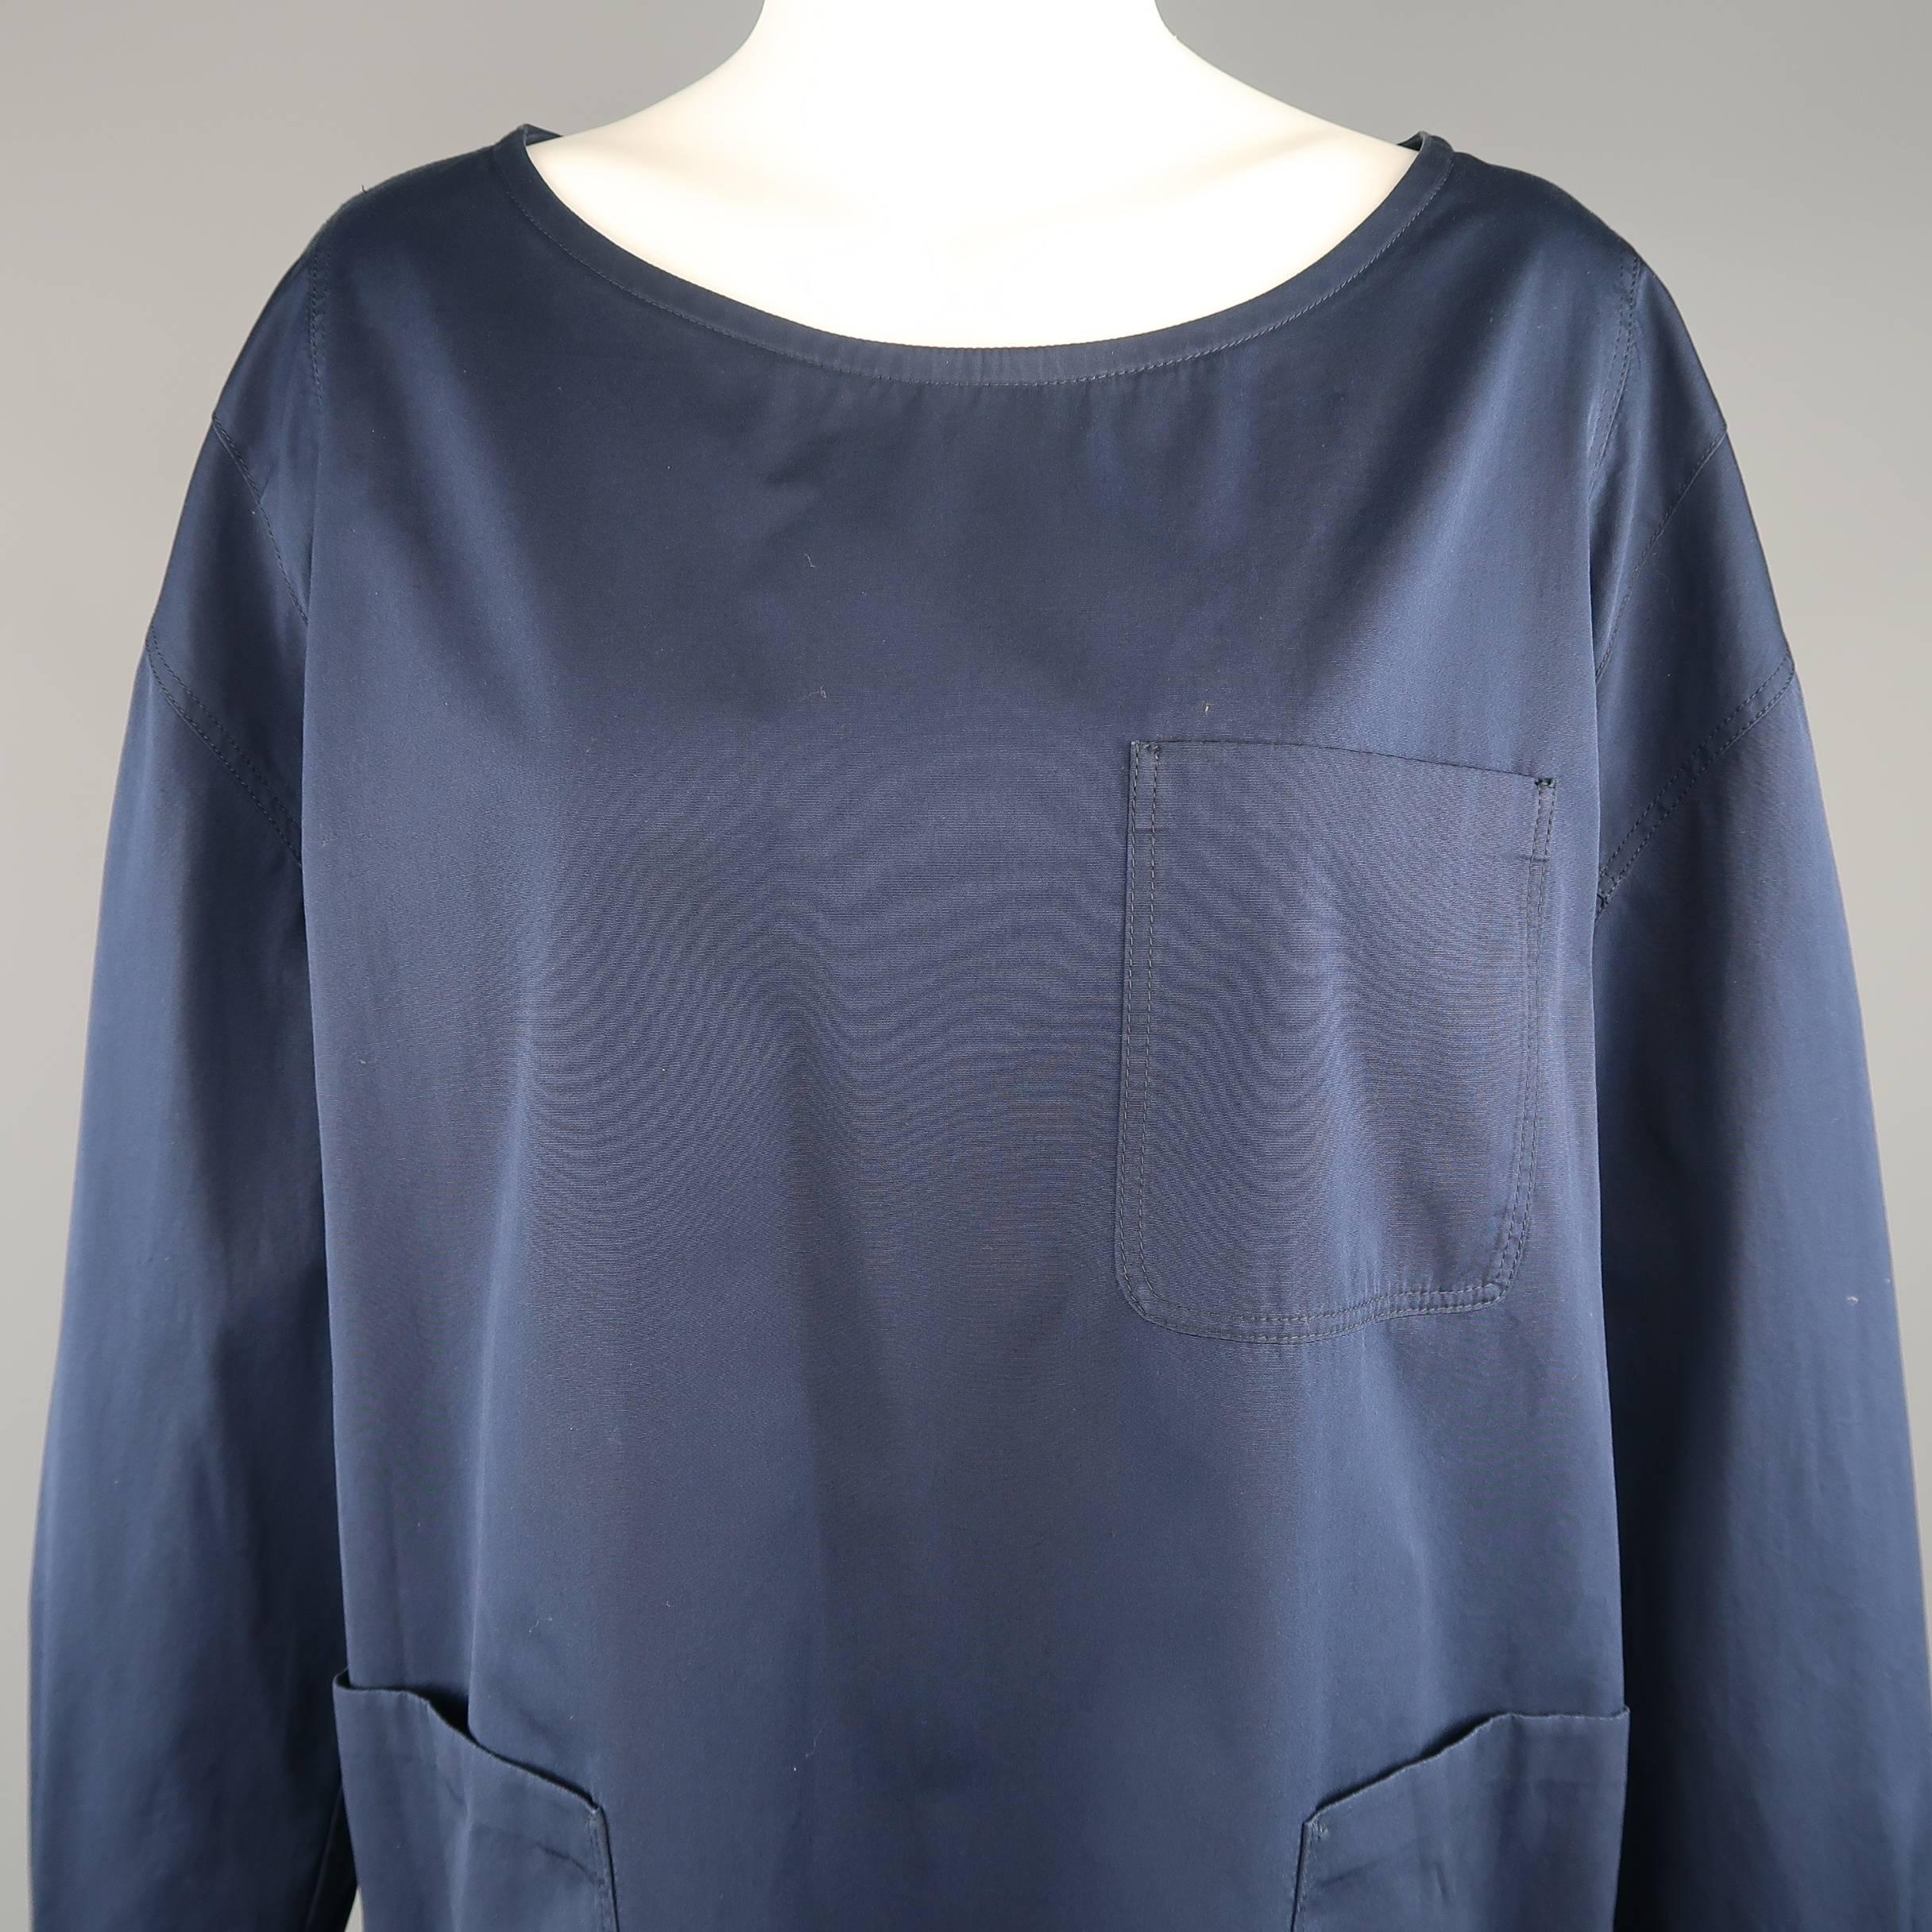 DRIES VAN NOTEN sack dress comes in navy blue cotton with a boat neck, oversized a line silhouette, patch pockets, and drop shoulder lone sleeves with denim jacket button cuffs.
 
Excellent Pre-Owned Condition.
Marked: Small
 
Measurements:
